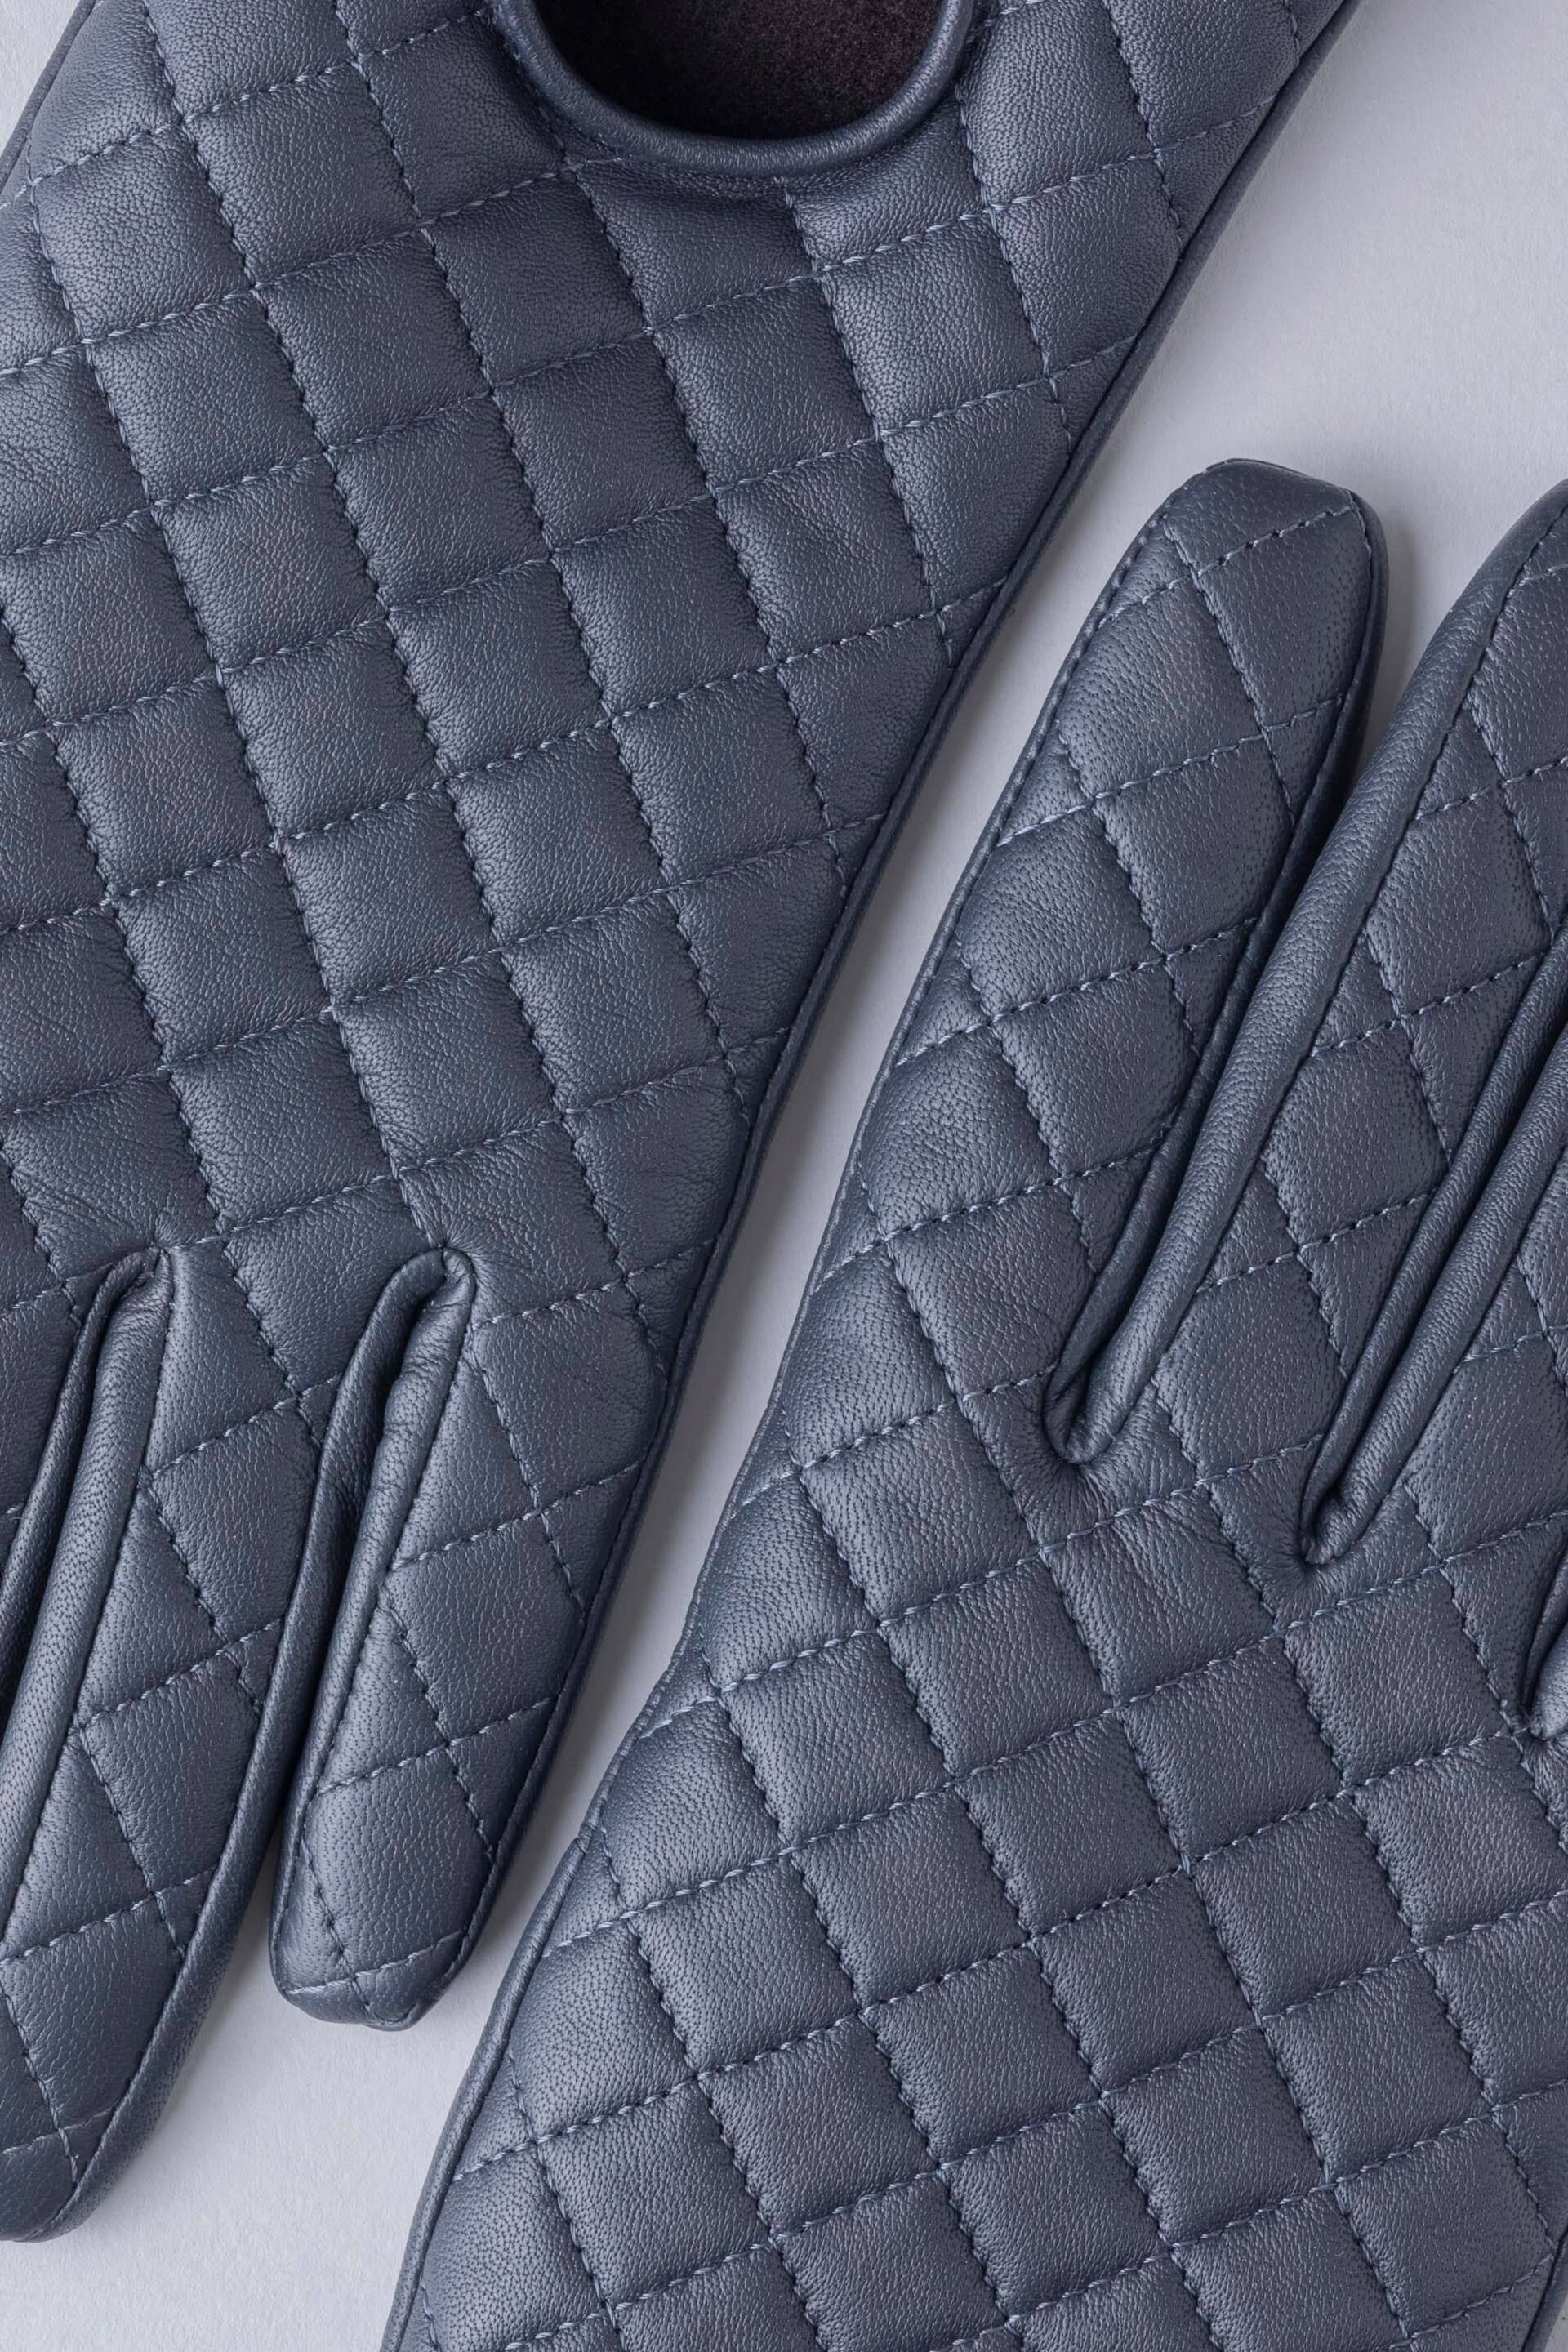 Lakeland Leather Tarn Leather Quilted Gloves - Image 3 of 3